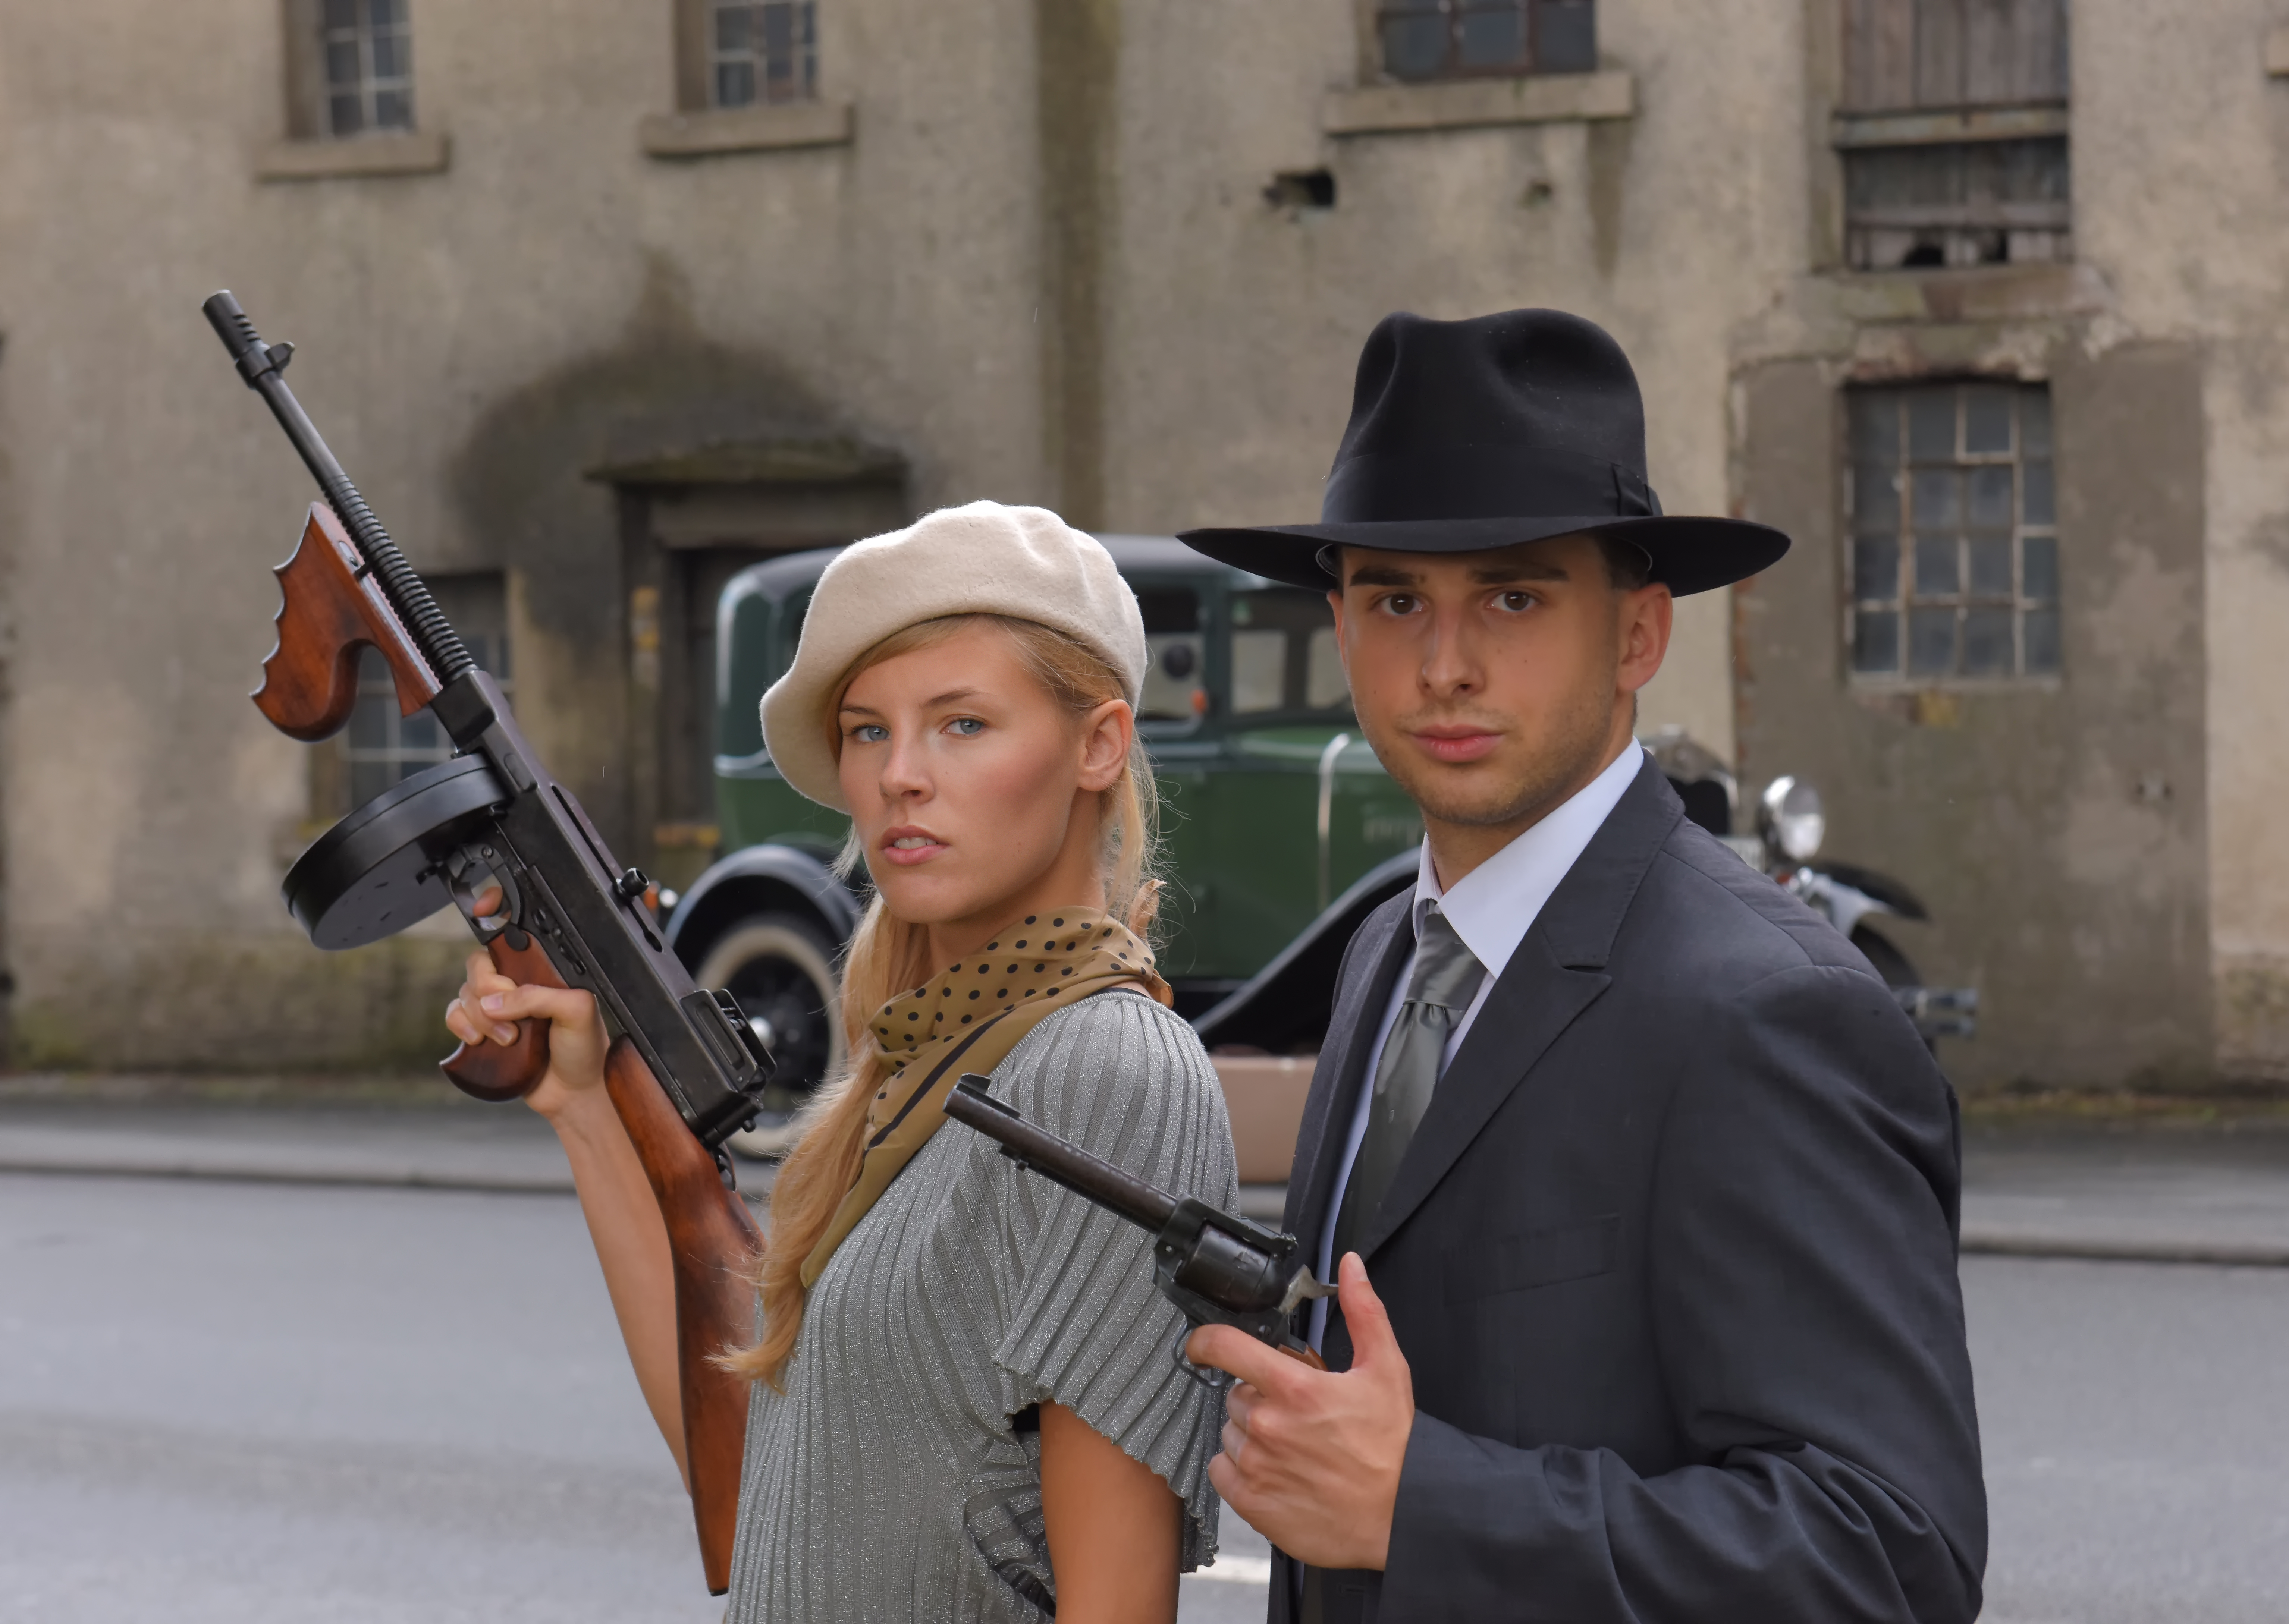 bonnie and clyde costumes